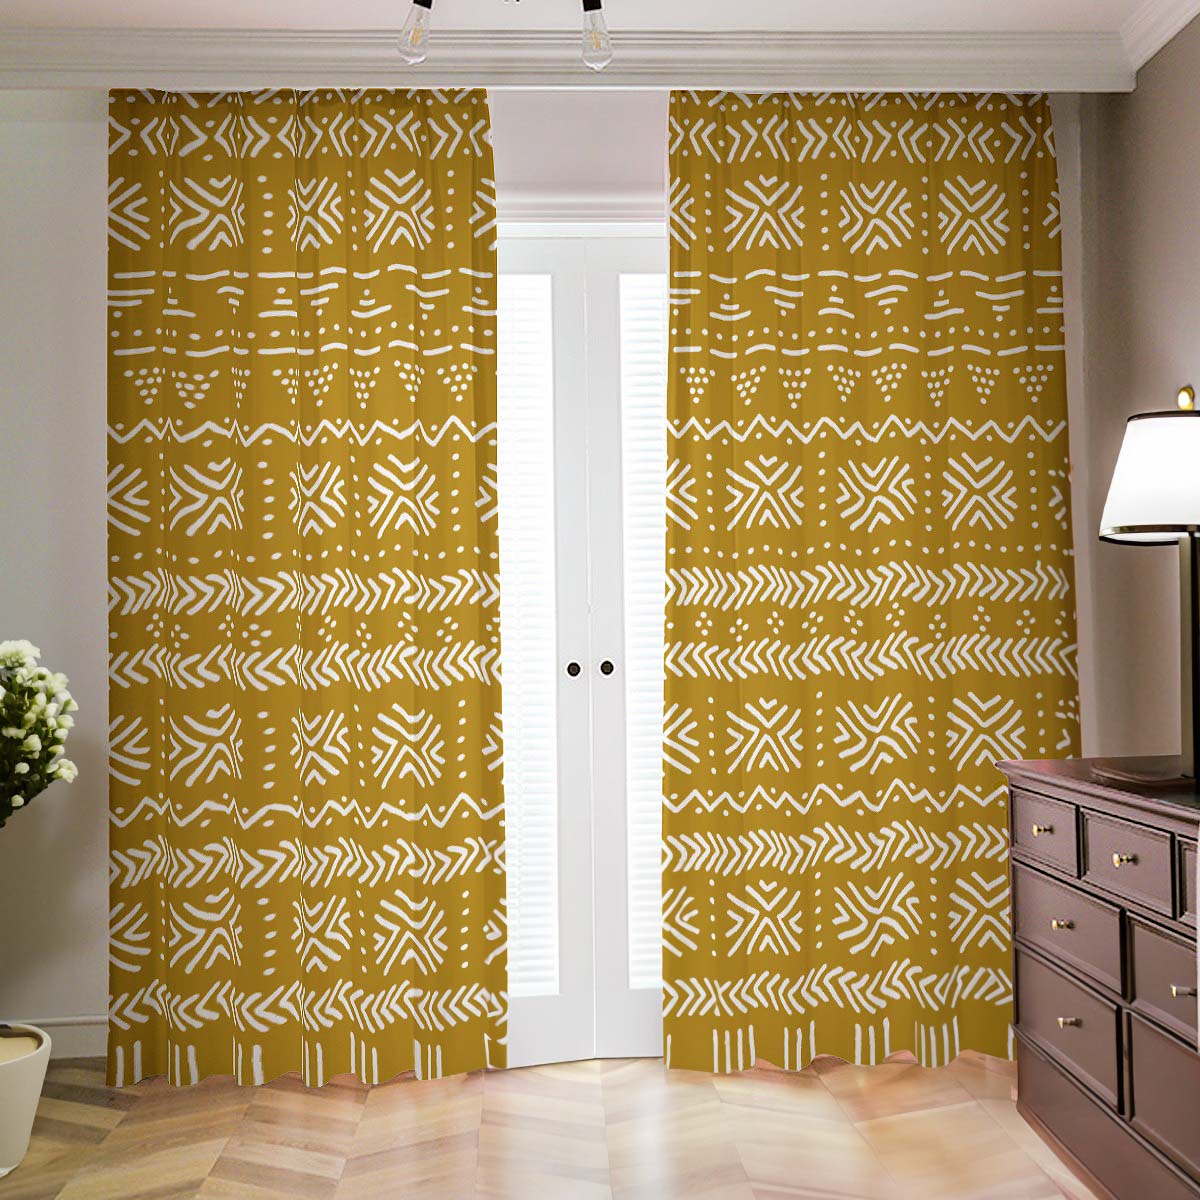 Gold White African Blackout Curtain Mudcloth Print (2-Piece)